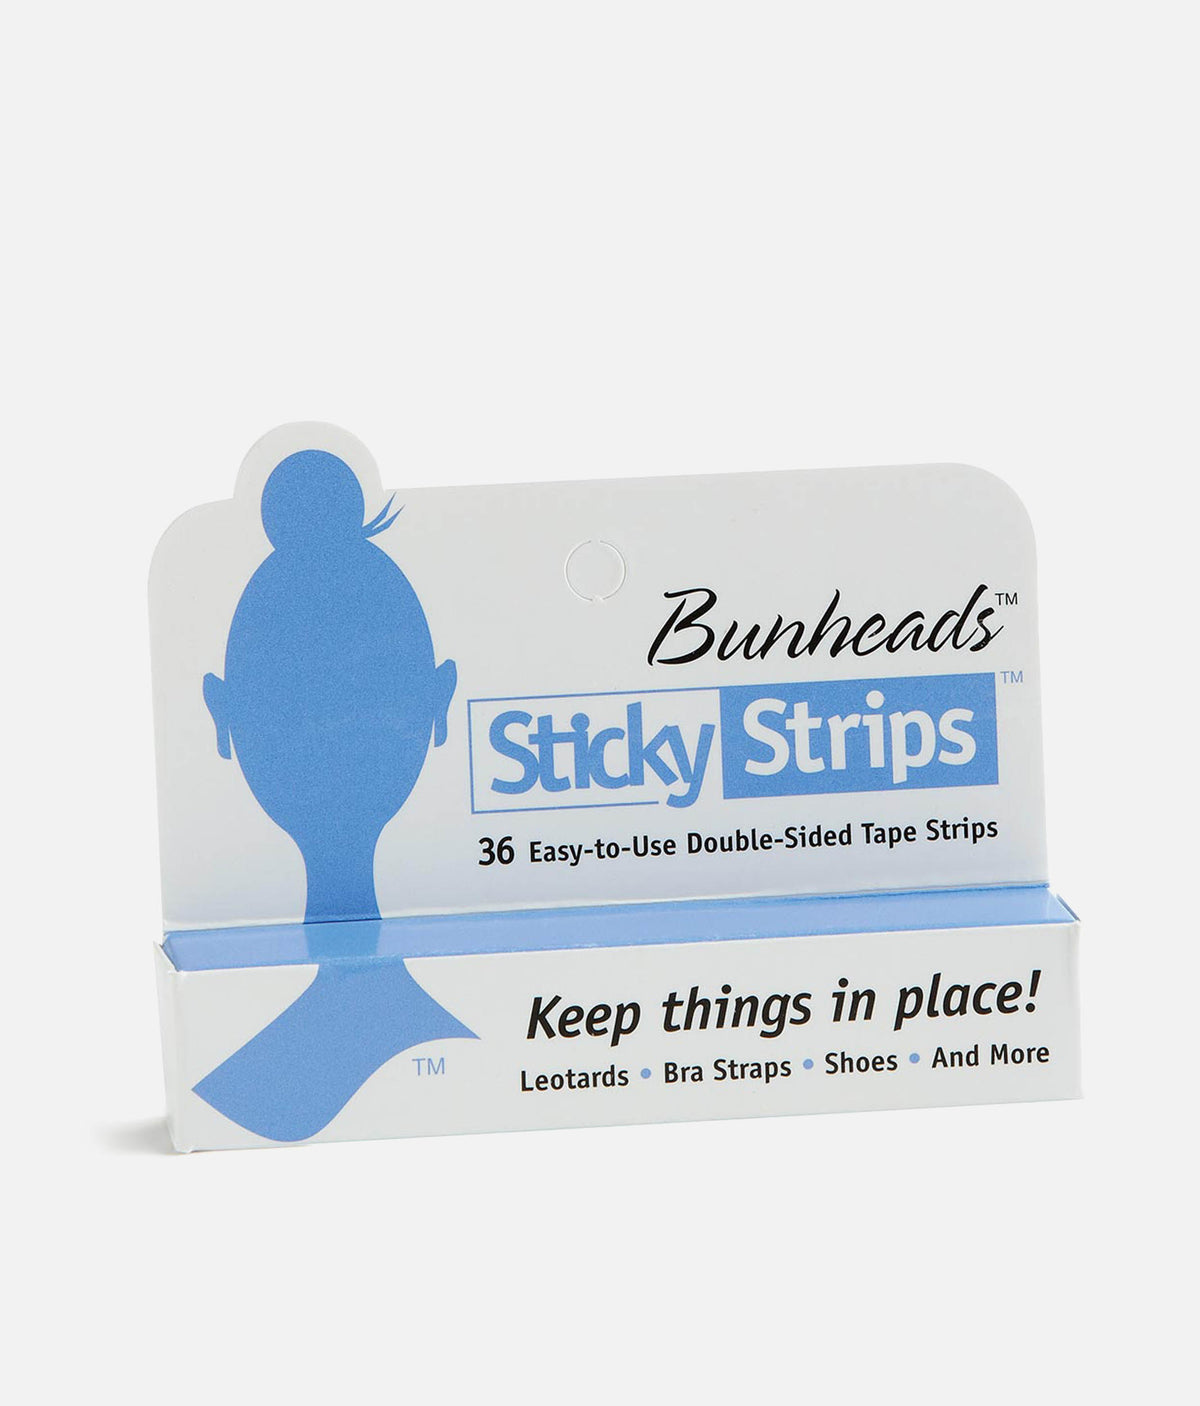 Double-Sided Sticky Strips™ Hold Straps in Place - STICKYSTRIPS